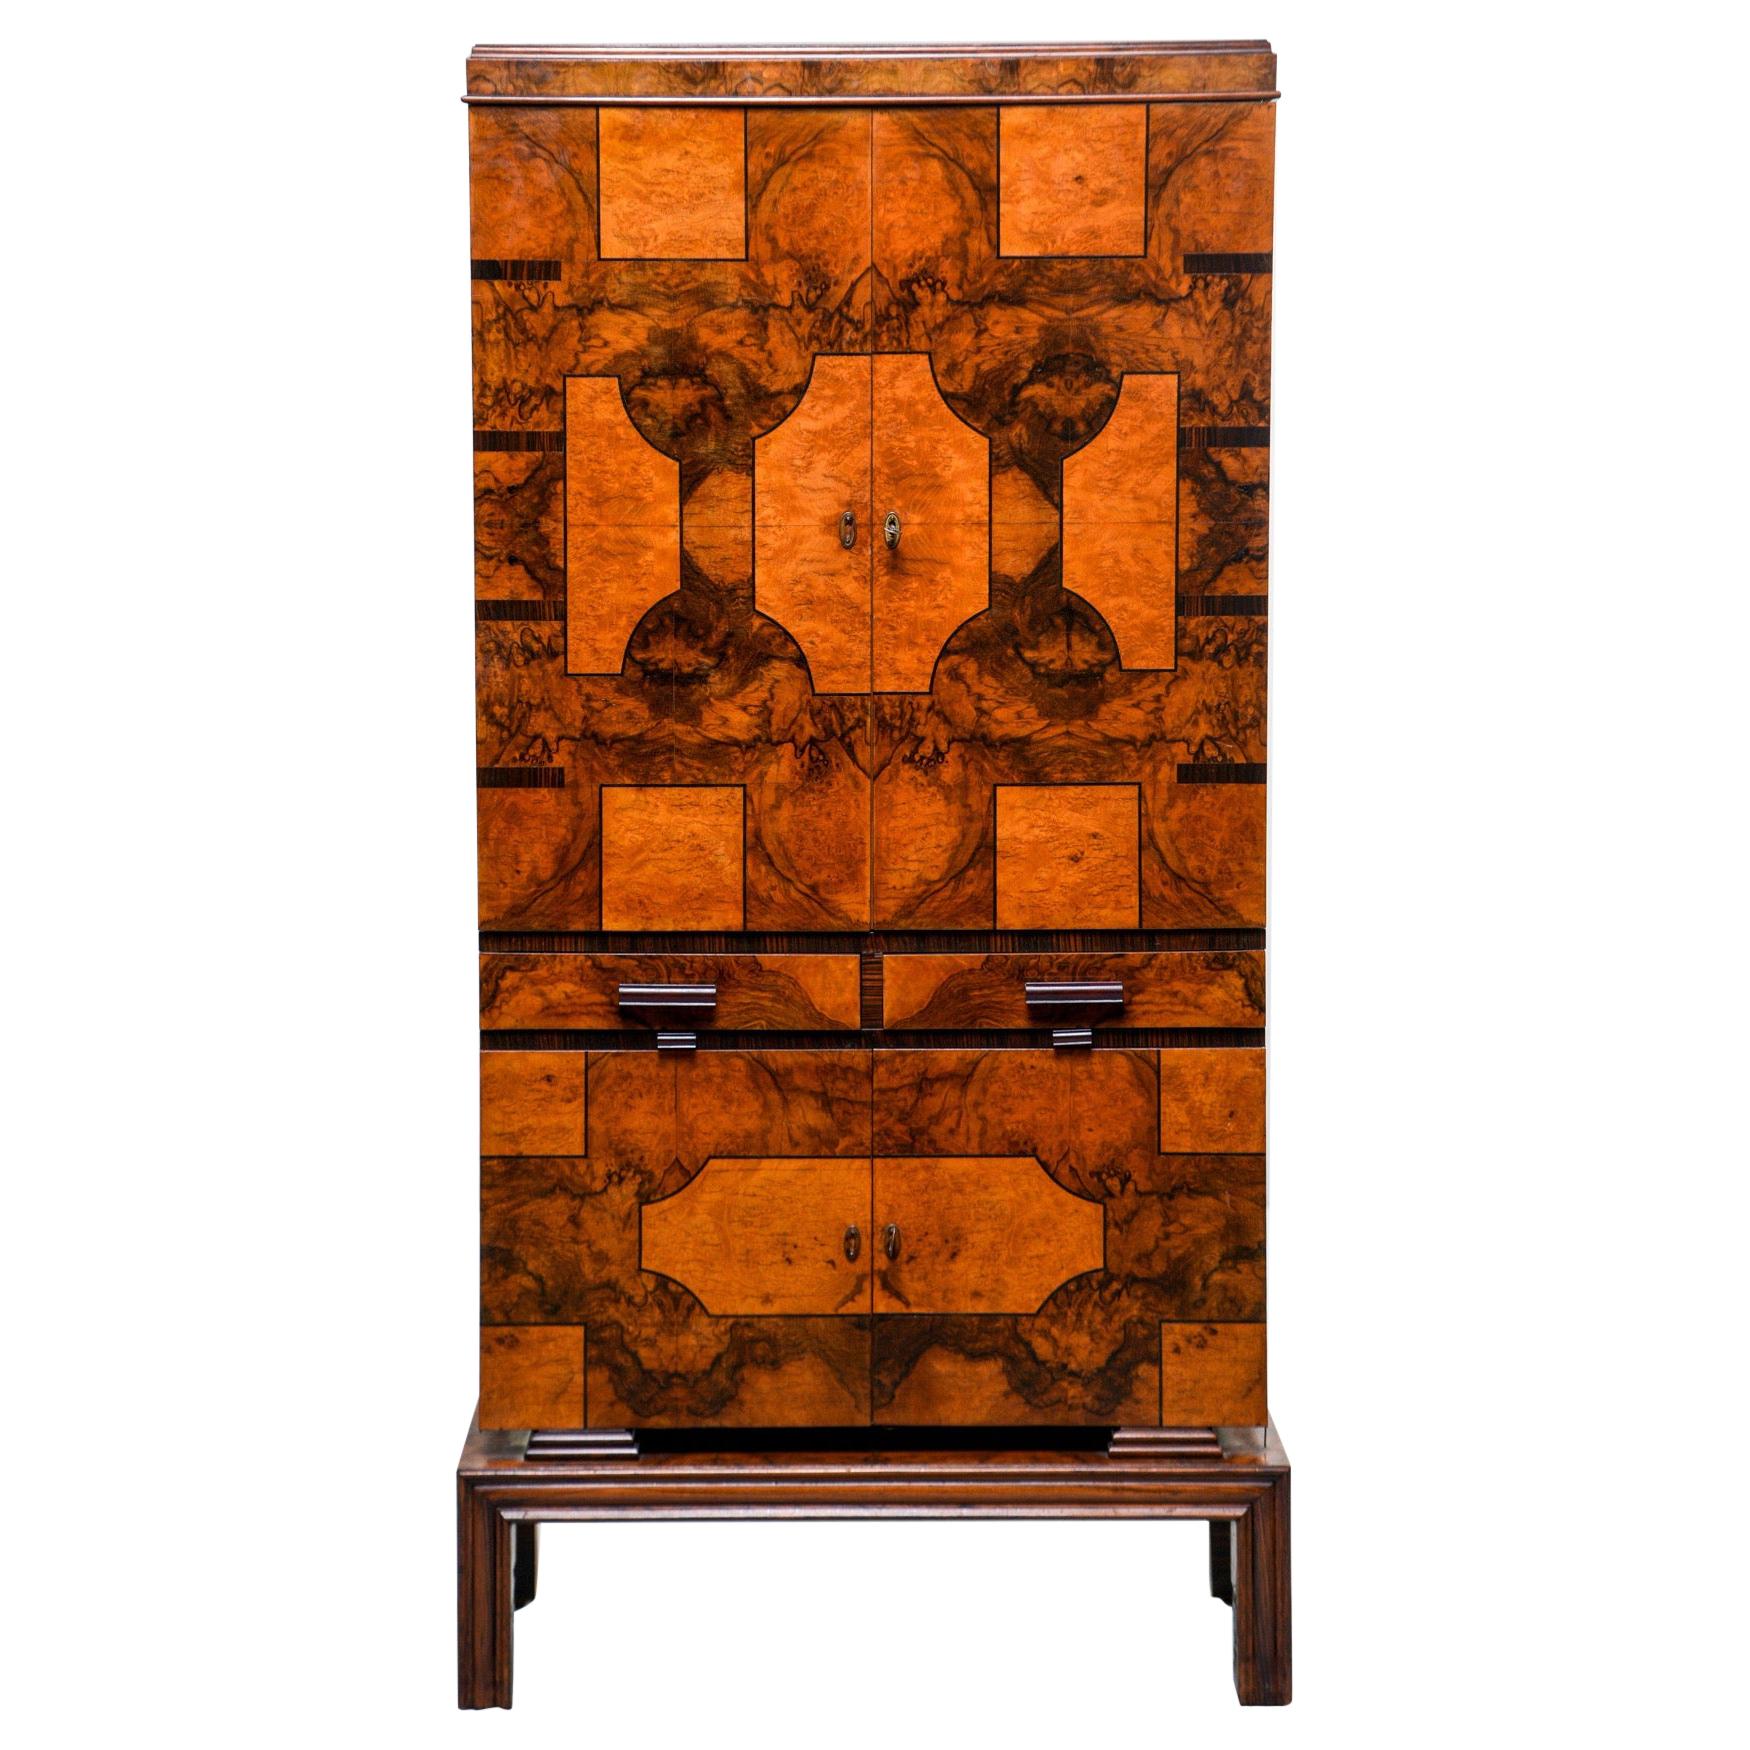 Tall Italian Art Deco Bar Cabinet with Marquetry and Mirrored Interior